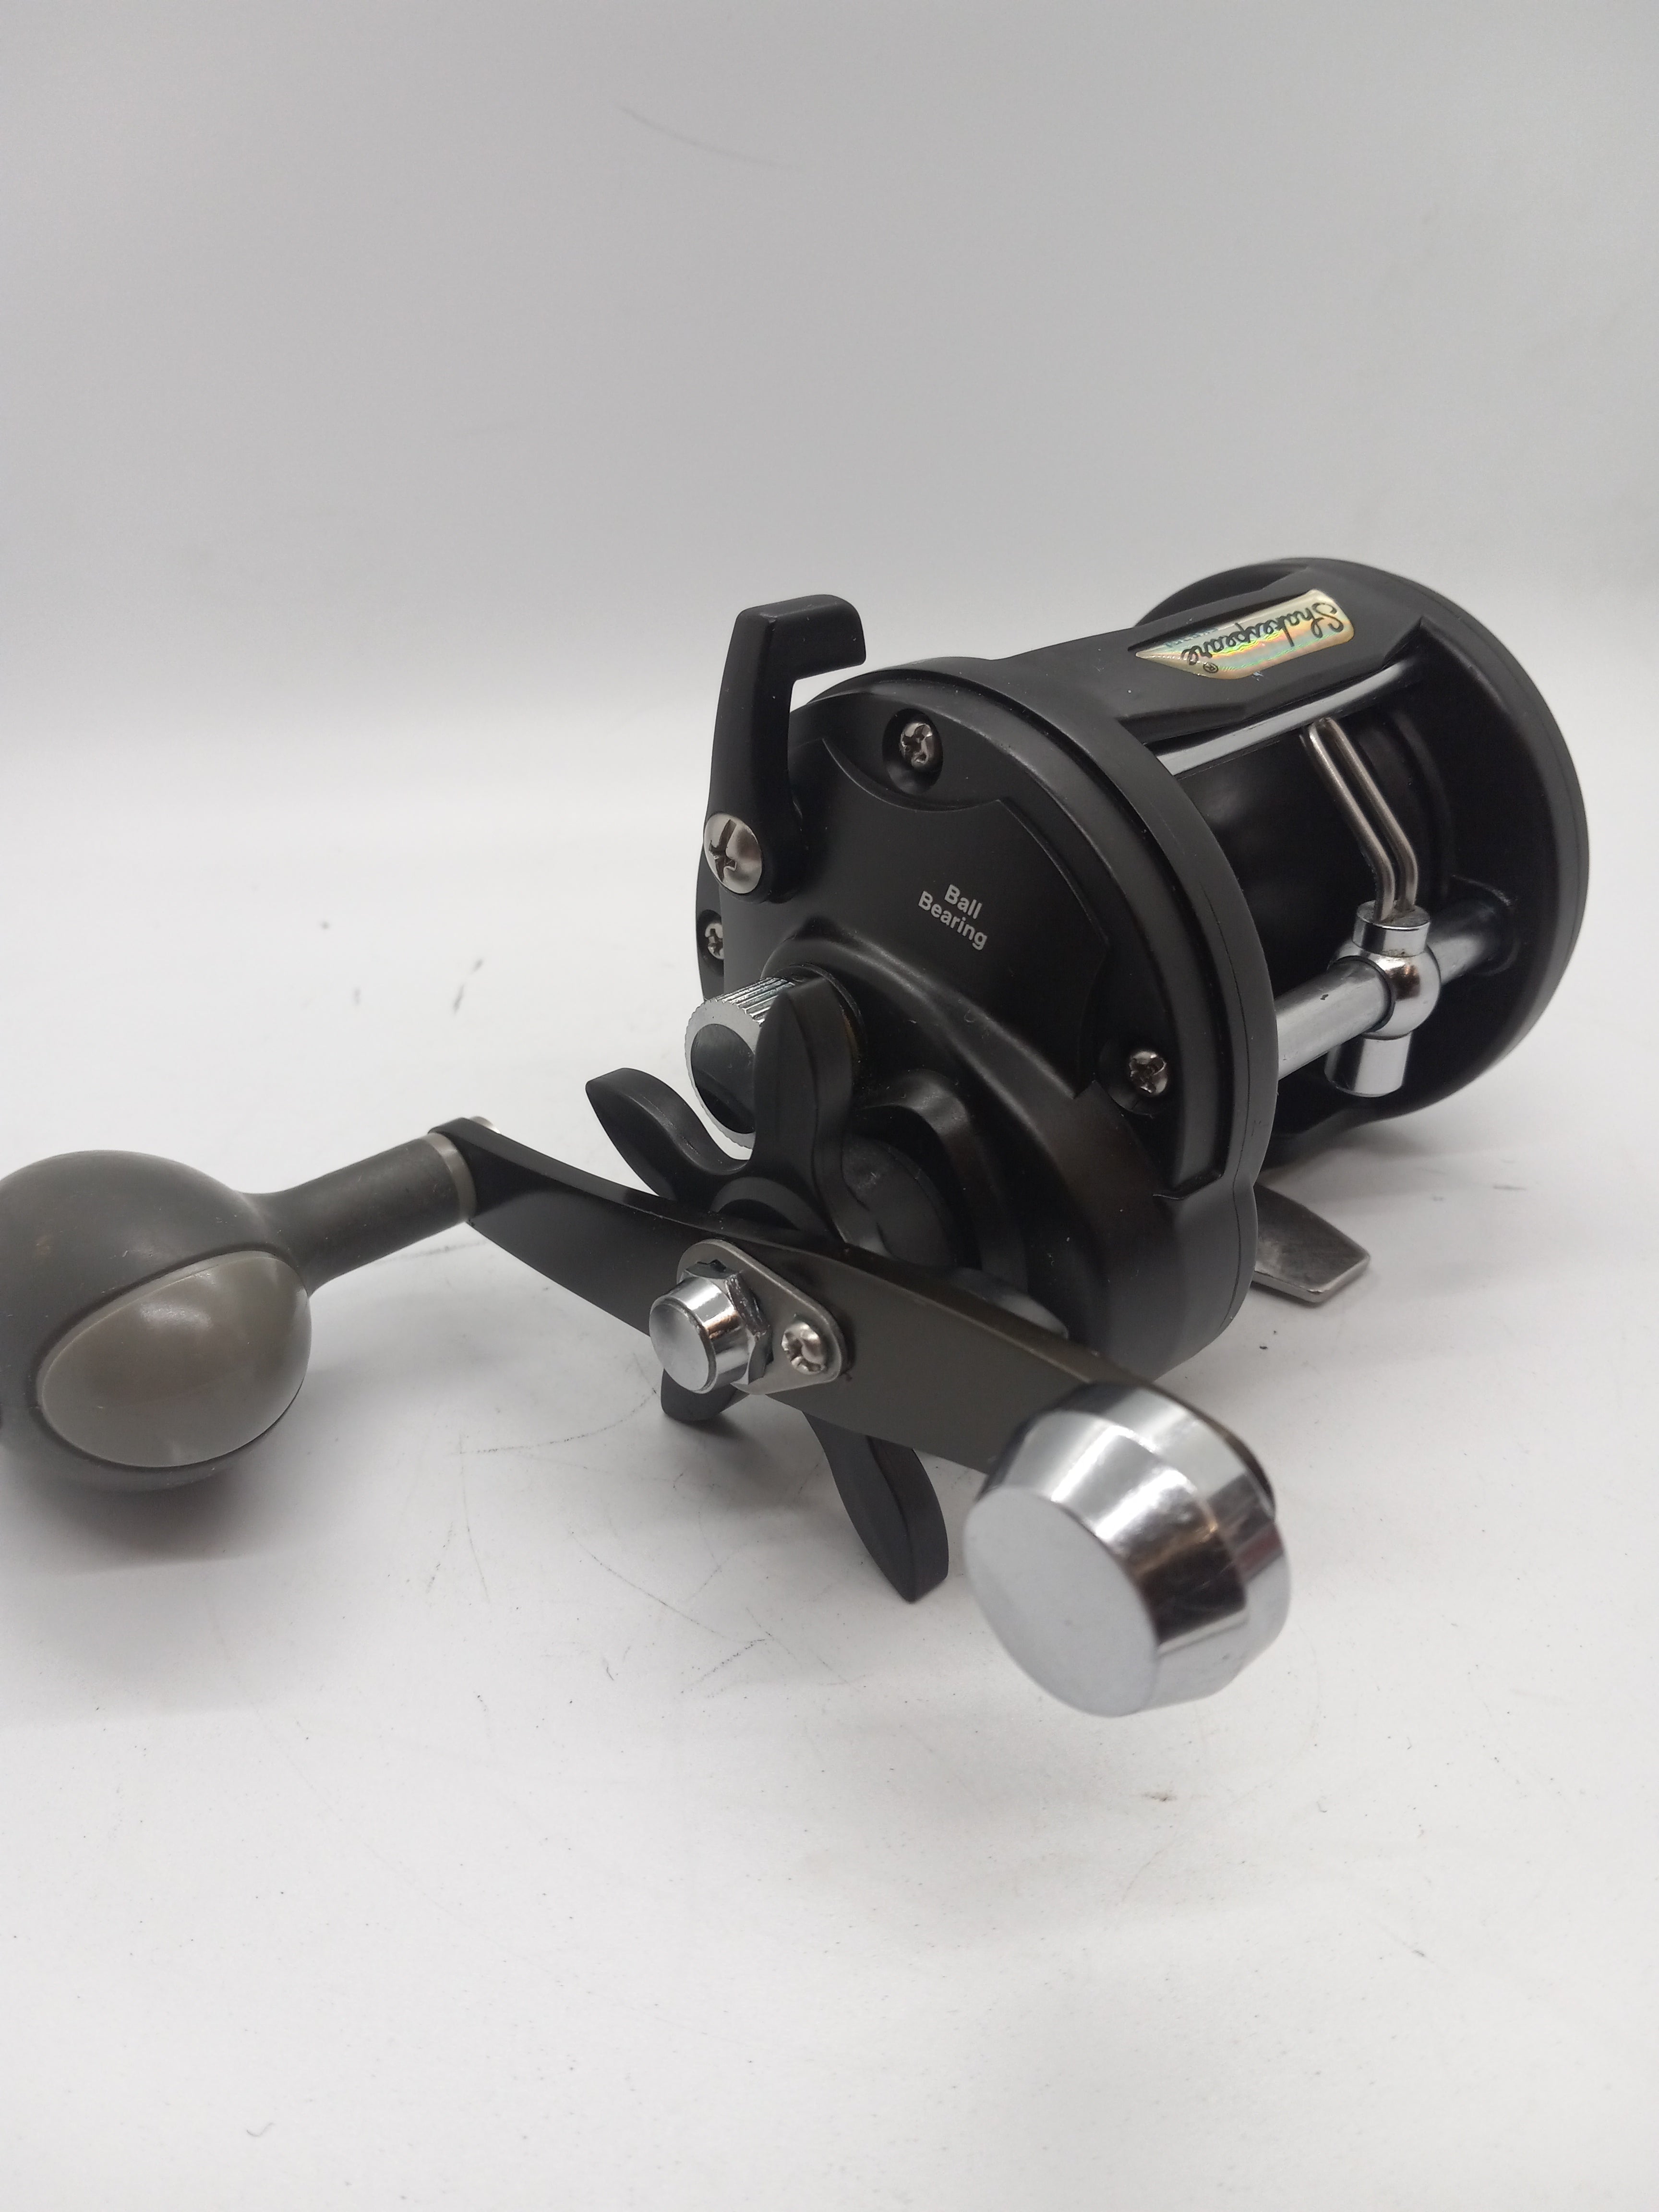 Shakespeare Tidewater TW30L Saltwater Fishing Reel New on PopScreen